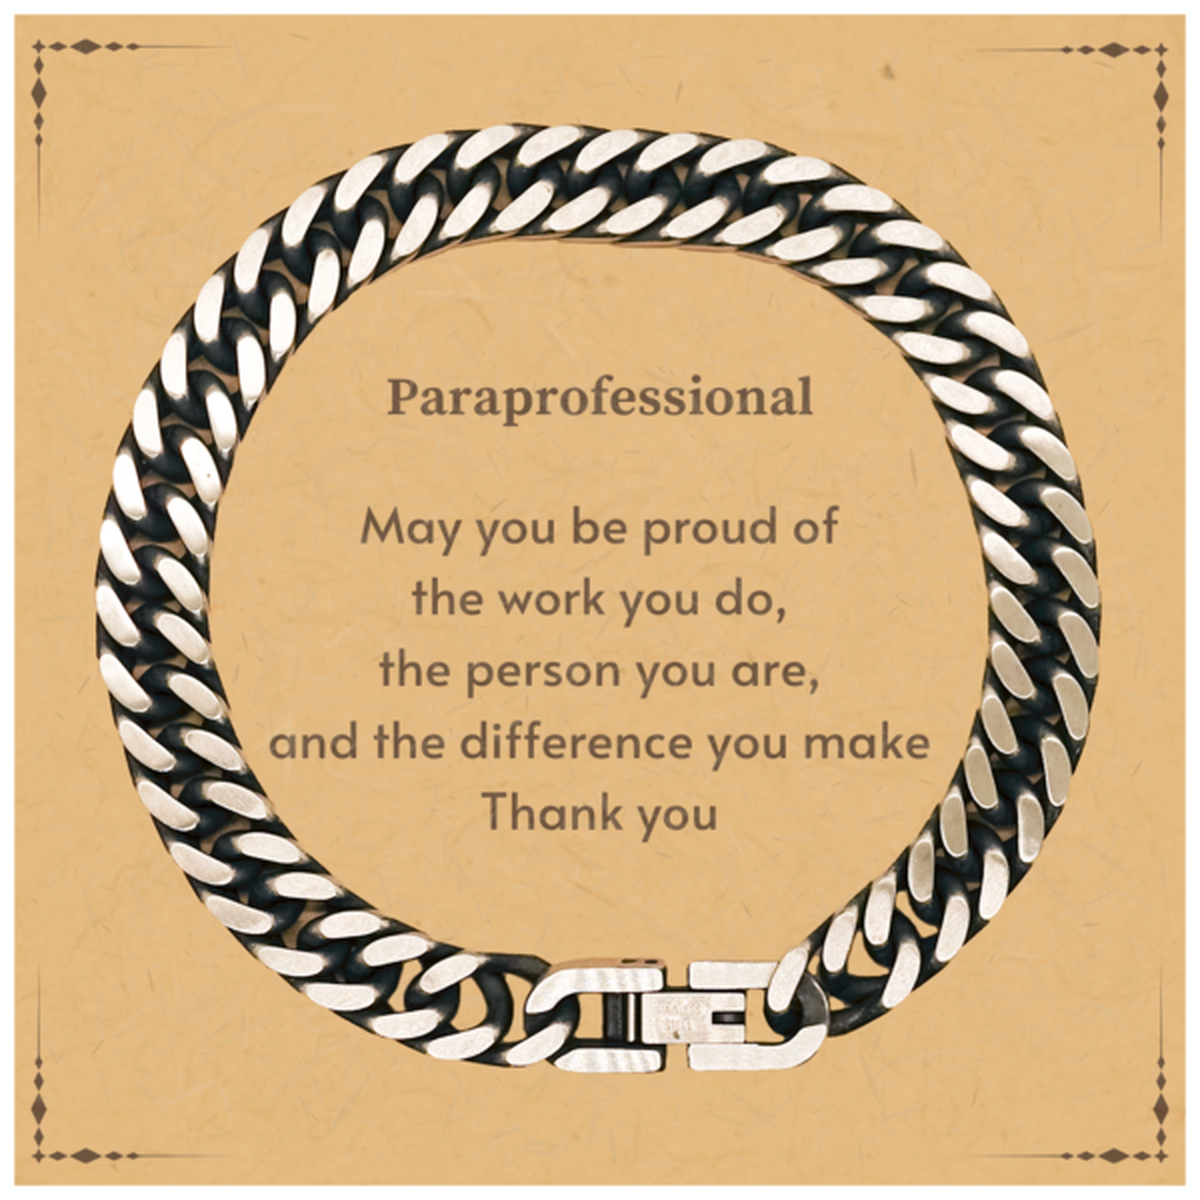 Heartwarming Cuban Link Chain Bracelet Retirement Coworkers Gifts for Paraprofessional, Paraprofessional May You be proud of the work you do, the person you are Gifts for Boss Men Women Friends